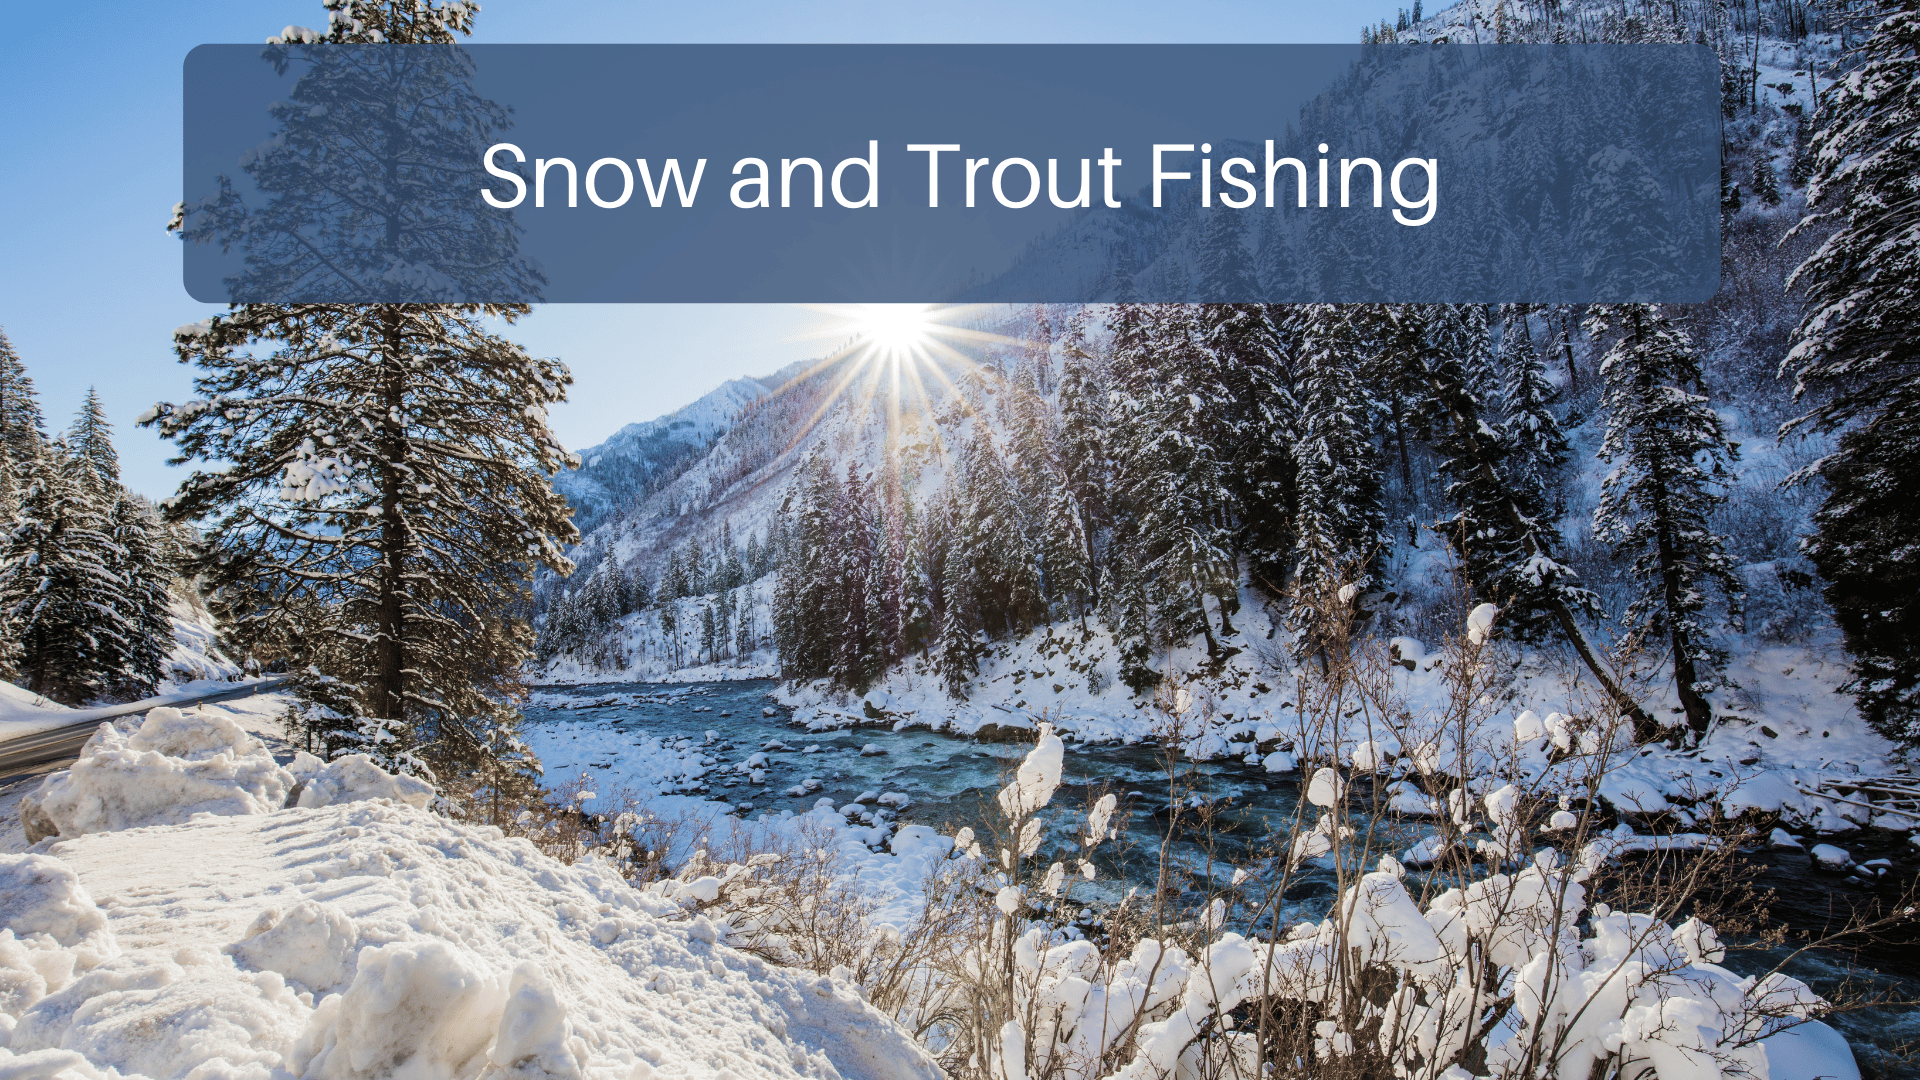 Snow and Trout Fishing